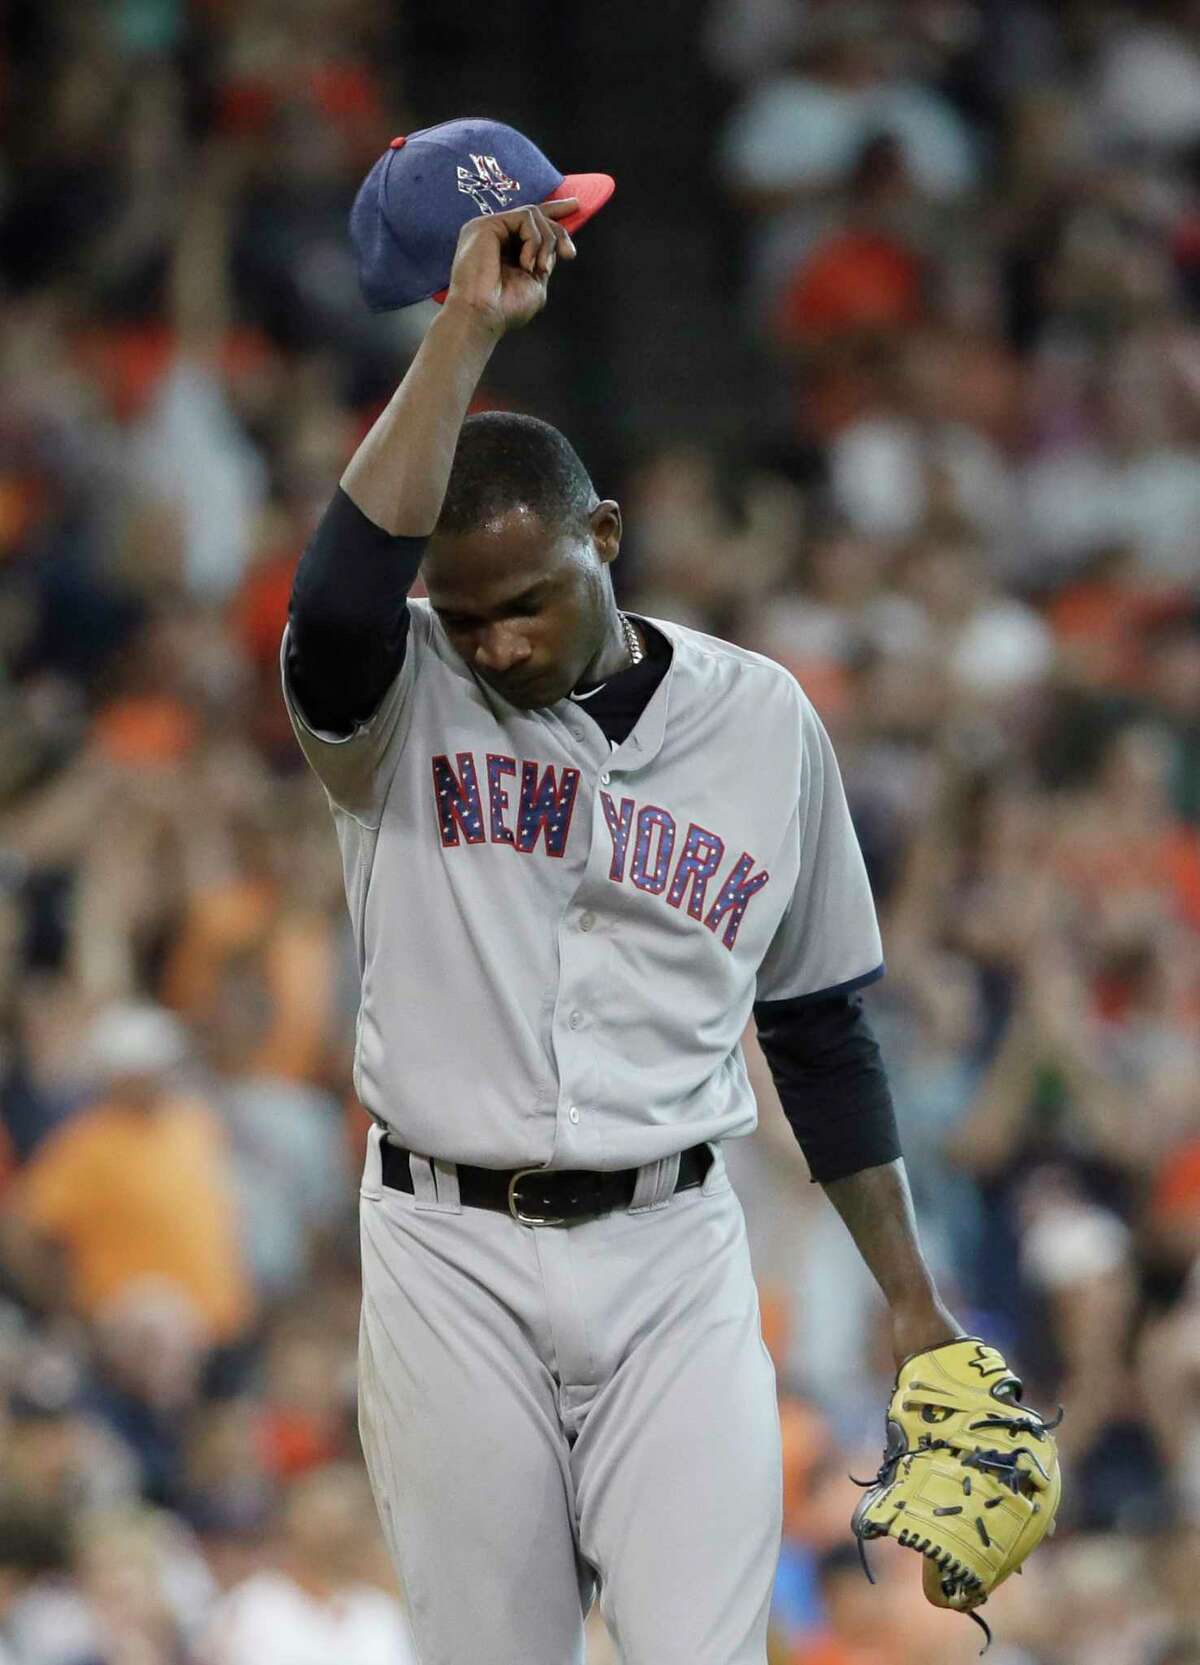 New York Yankees starting pitcher Domingo German wipes his head after giving up a two-run home run to Houston Astros' Yuli Gurriel during the seventh inning of a baseball game, Sunday, July 2, 2017, in Houston. (AP Photo/David J. Phillip)